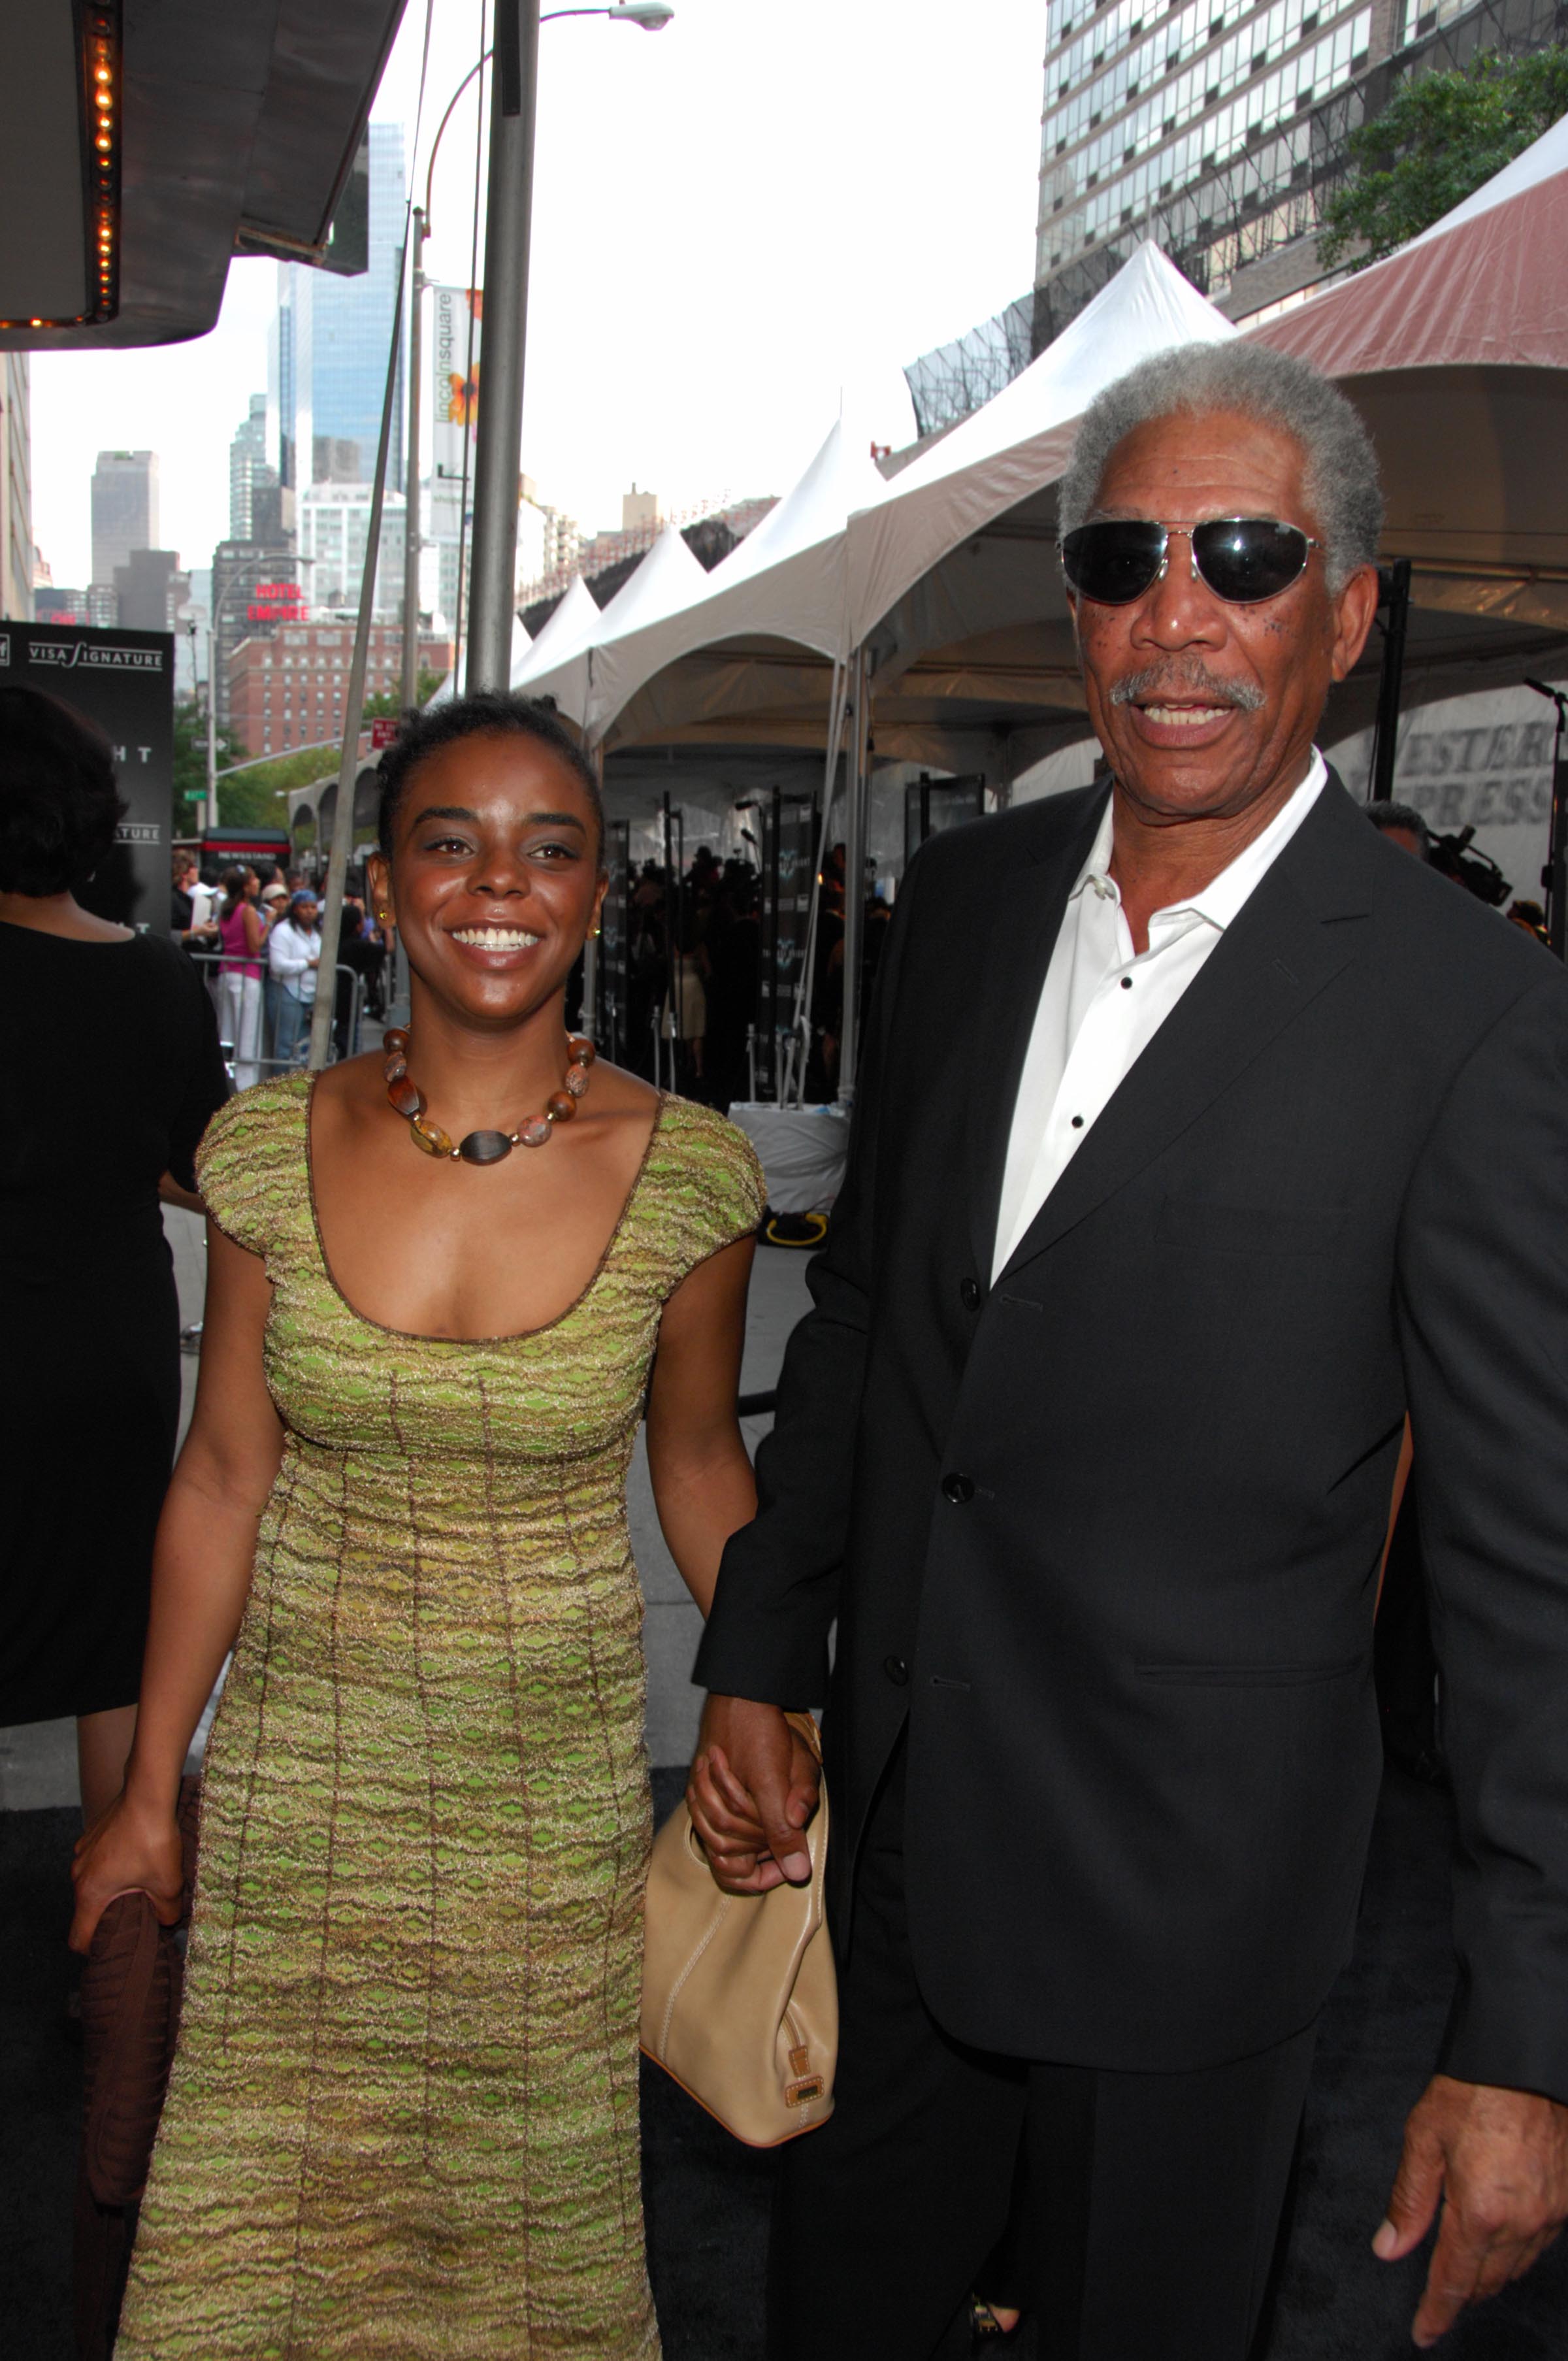 E'Dena Hines and Morgan Freeman at the premiere of "The Dark Knight" at AMC Loews Lincoln Center on July 14, 2008 in New York City | Source: Getty Images